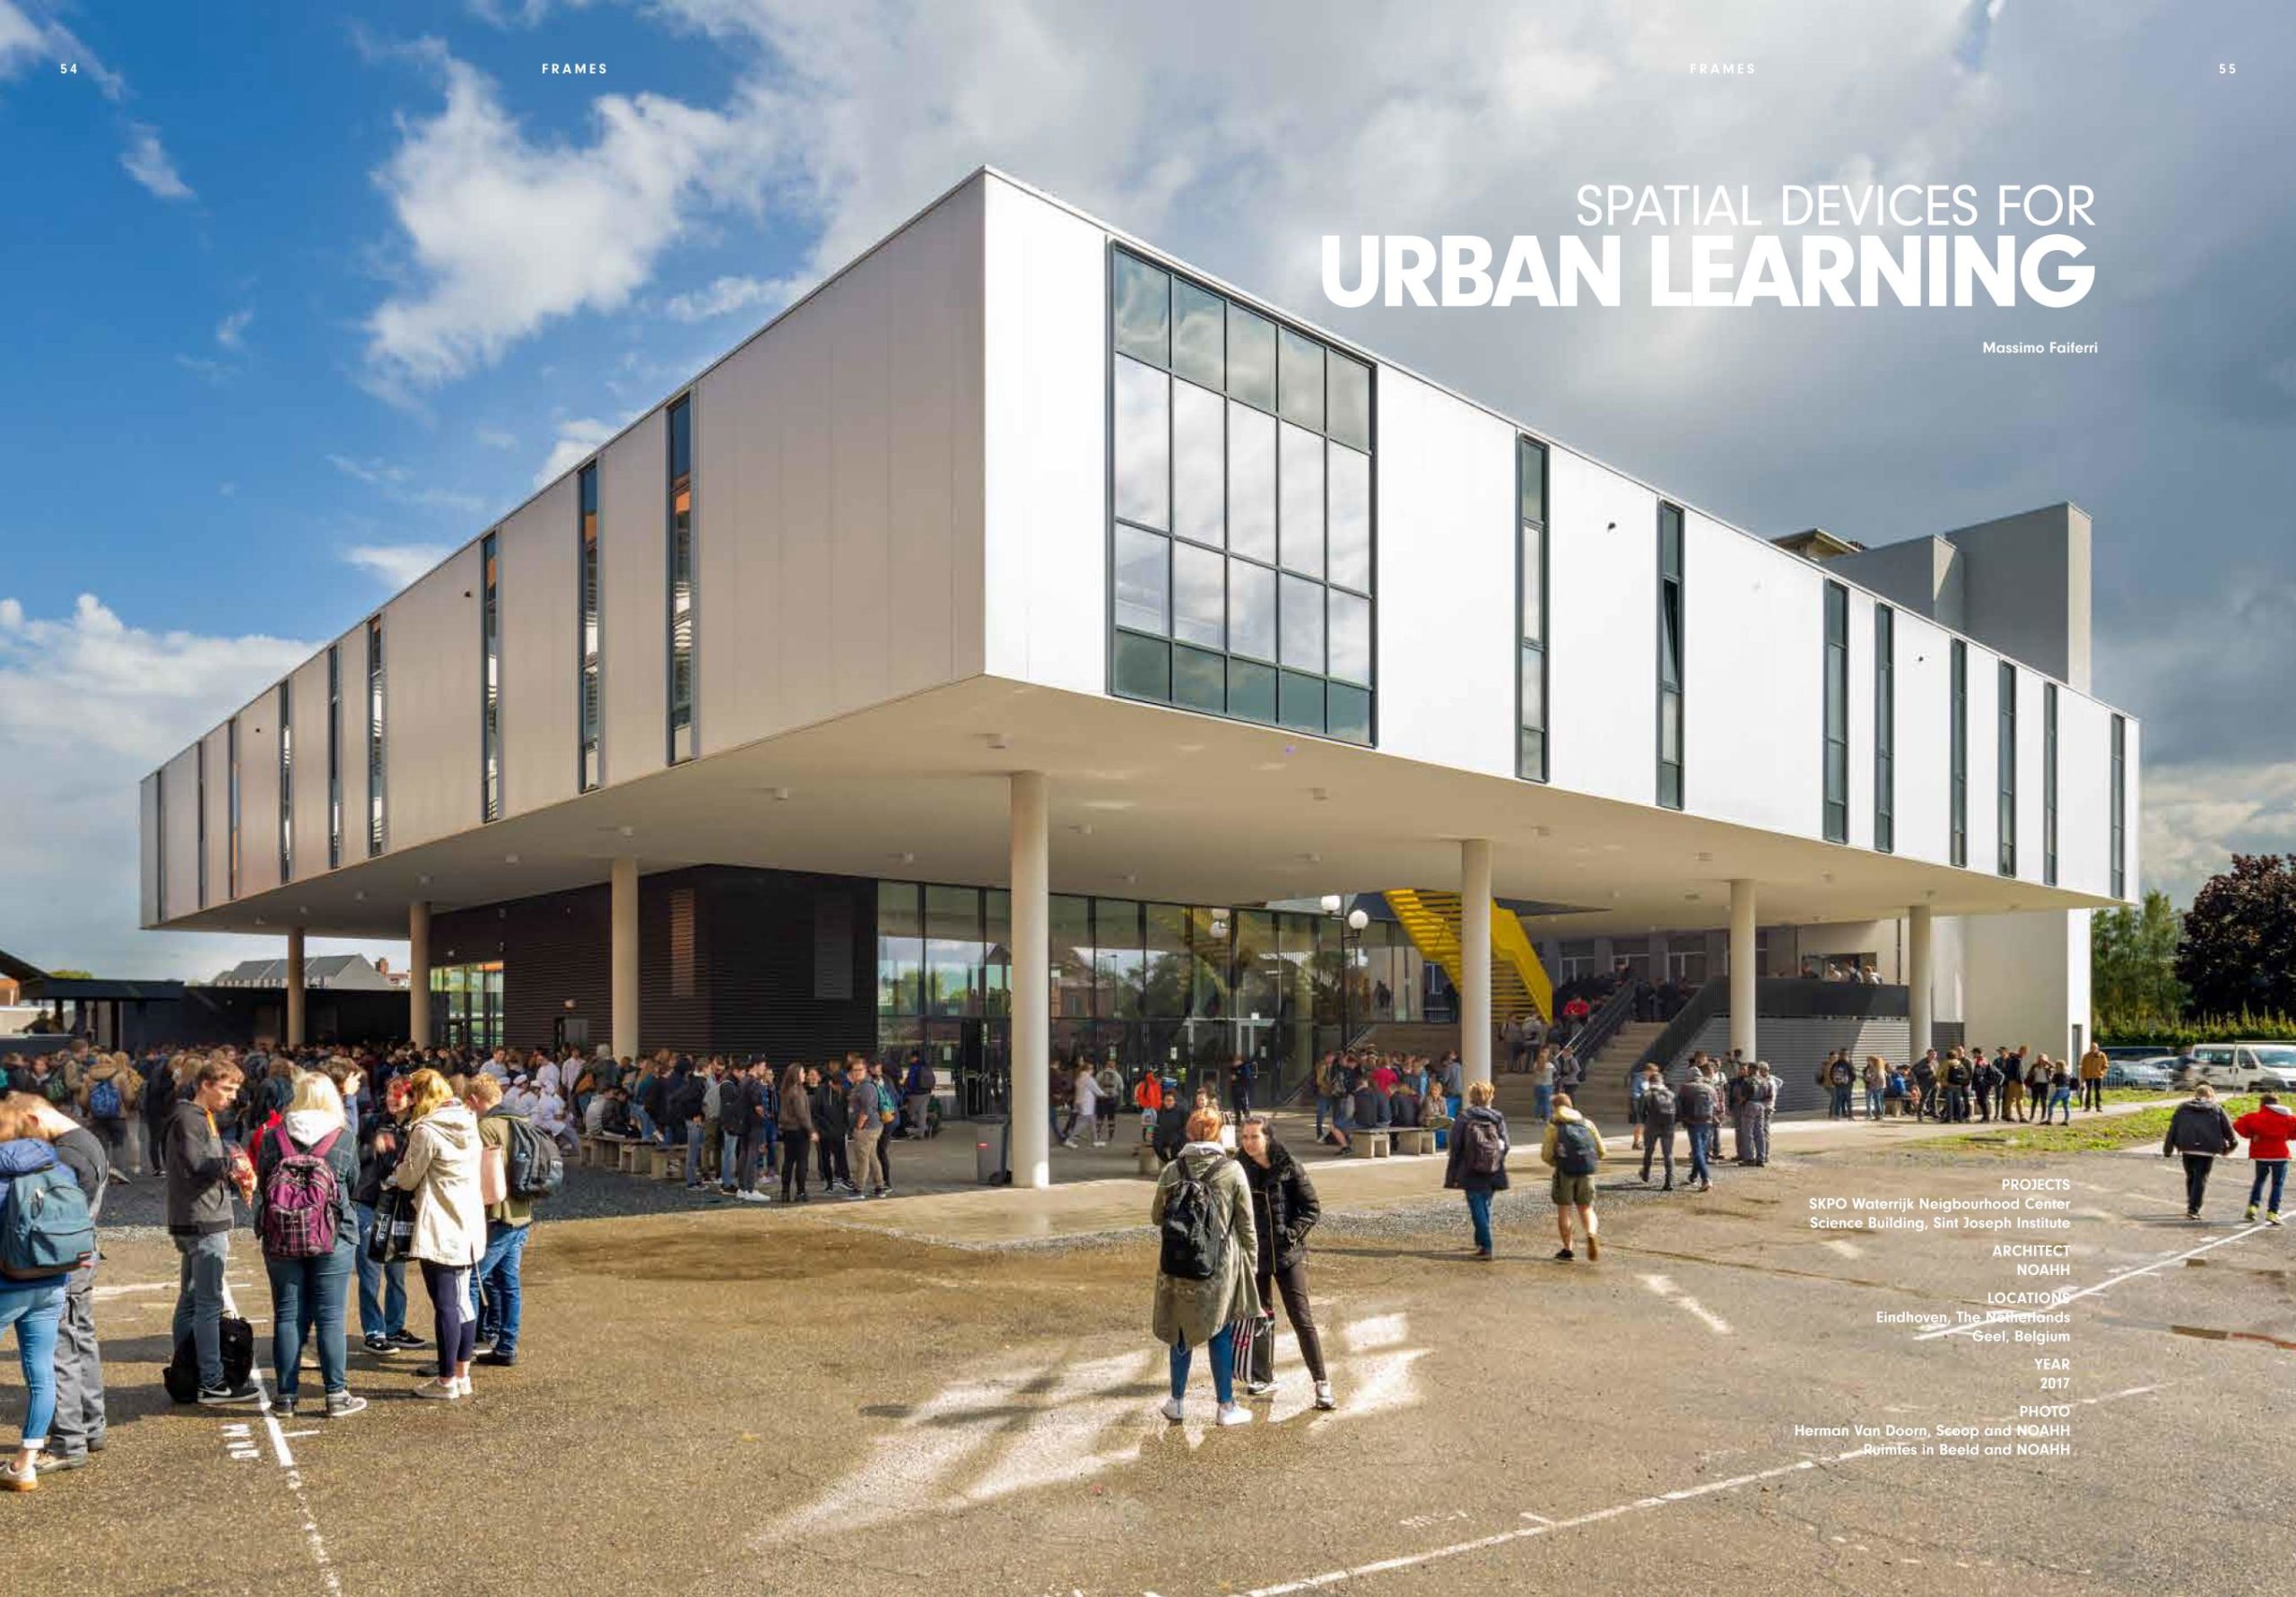 SPATIAL DEVICES FOR URBAN LEARNING